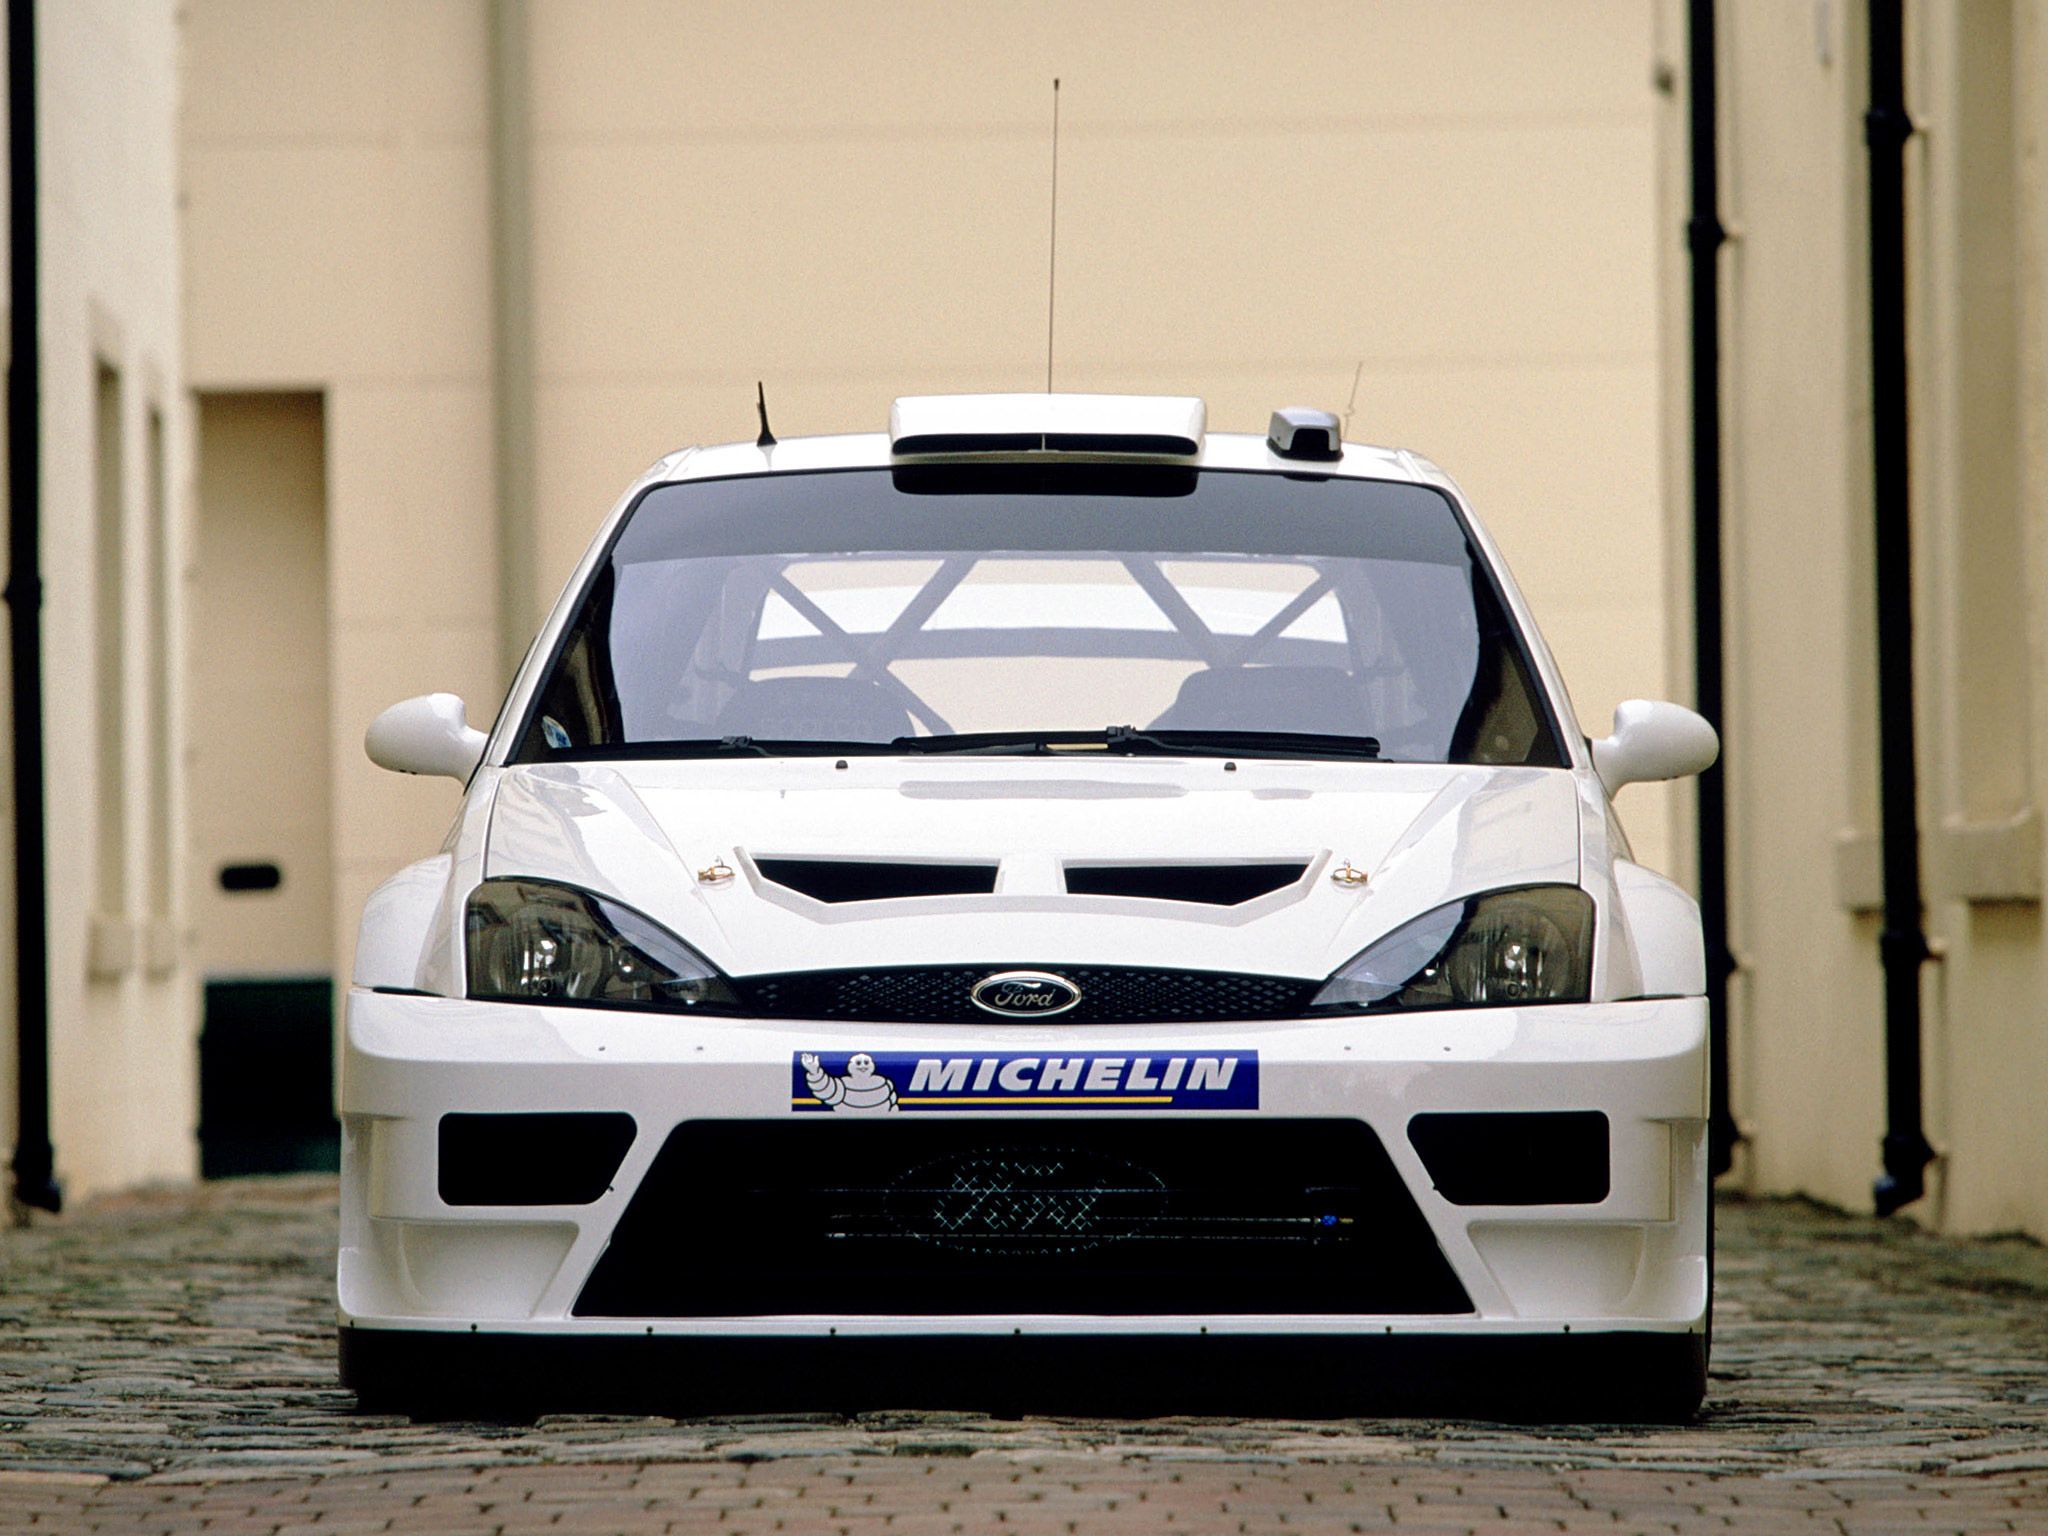 2003-Ford-Focus-RS-WRC-006-1536